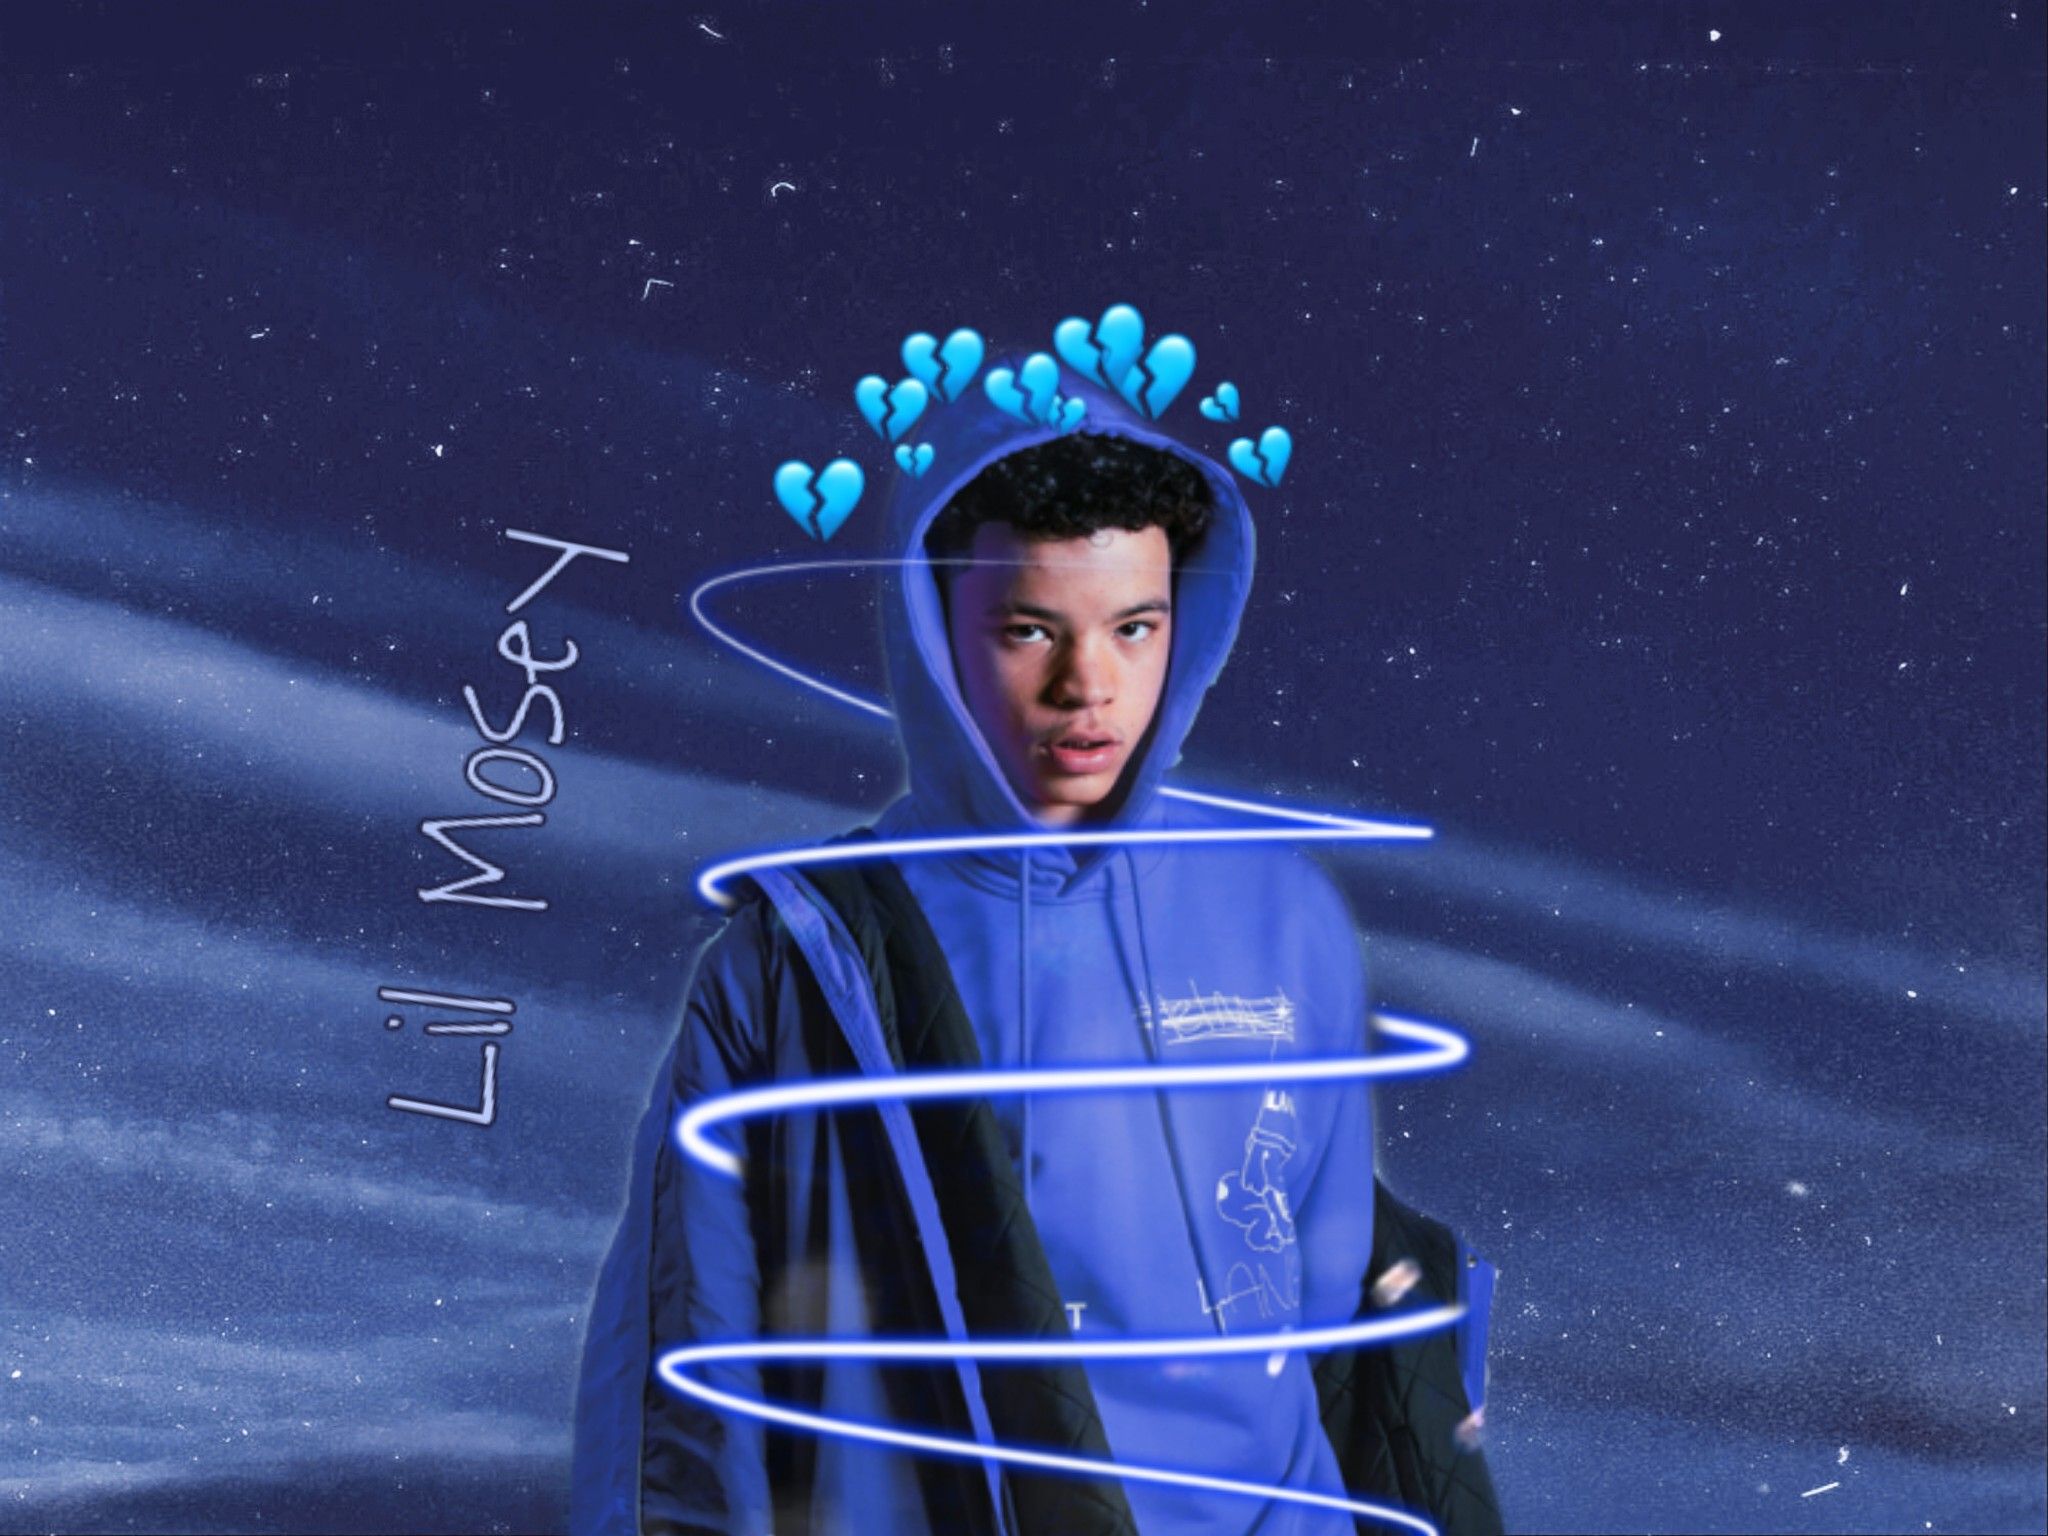 Lil Mosey Aesthetic Wallpapers Wallpaper Cave. 